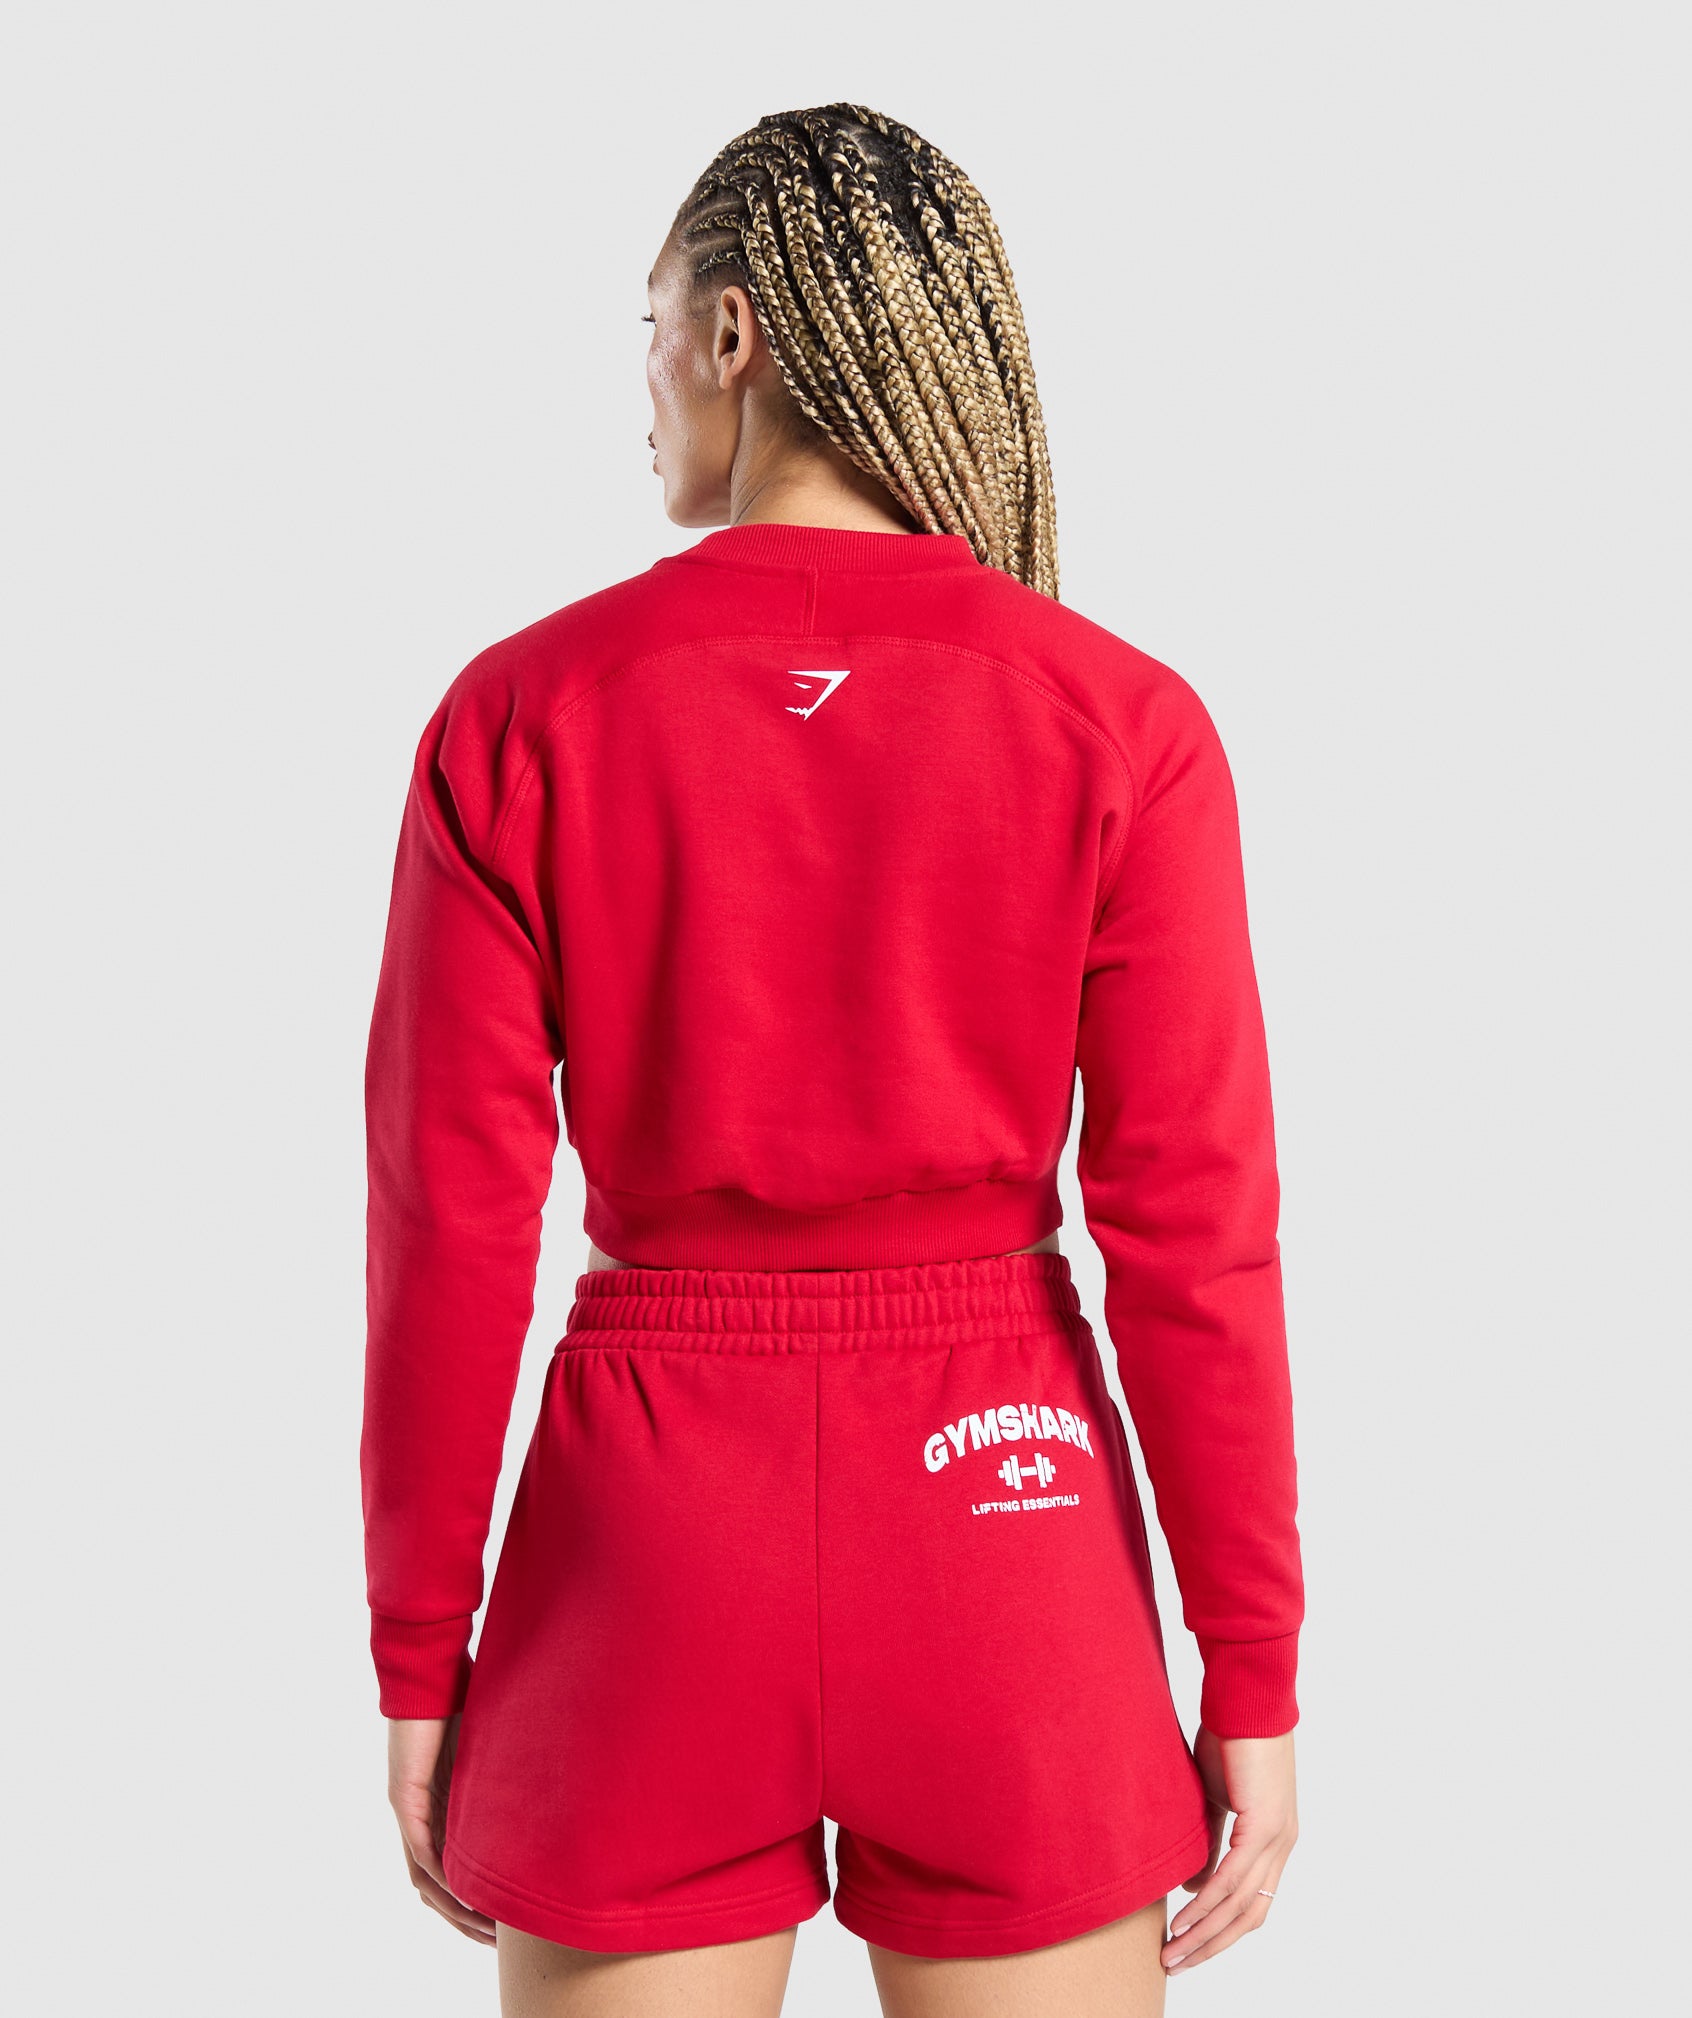 Team GS Cropped Sweatshirt in Carmine Red - view 2